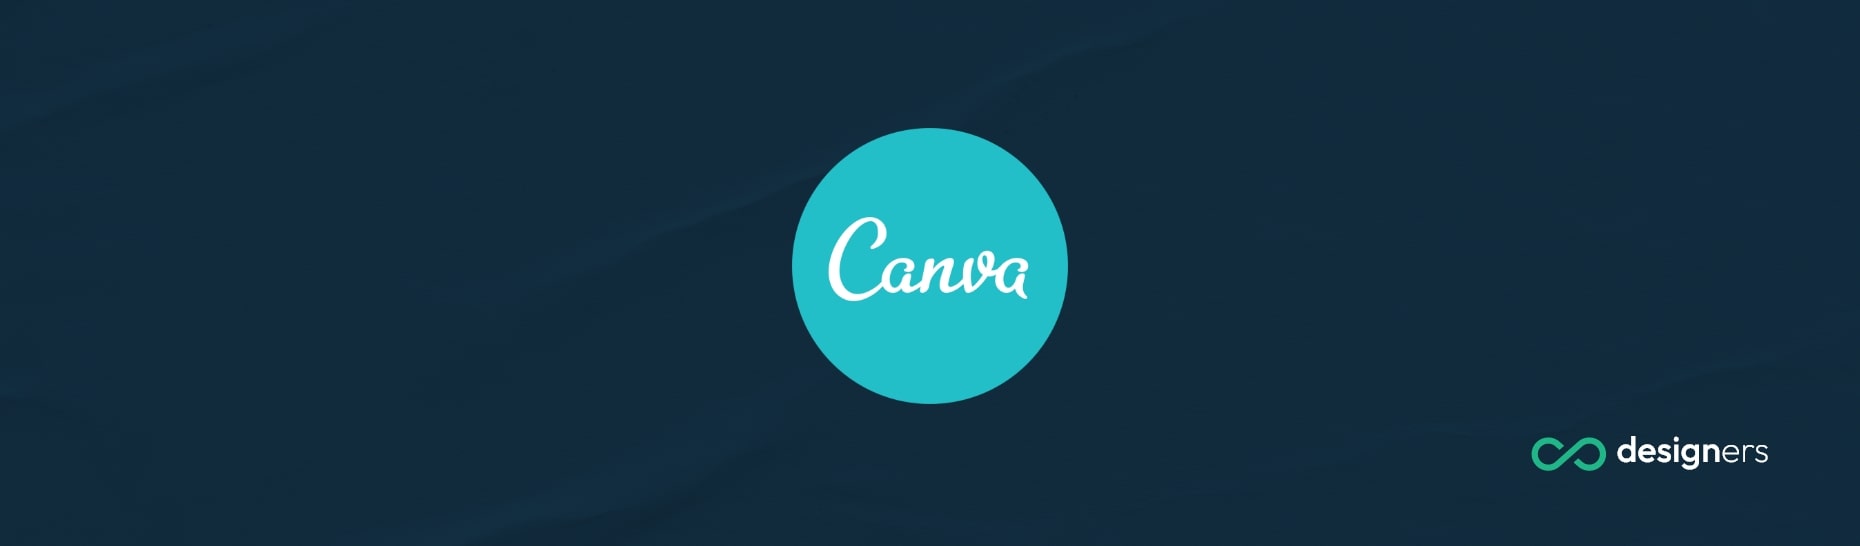 Can I Make a Book Cover on Canva?